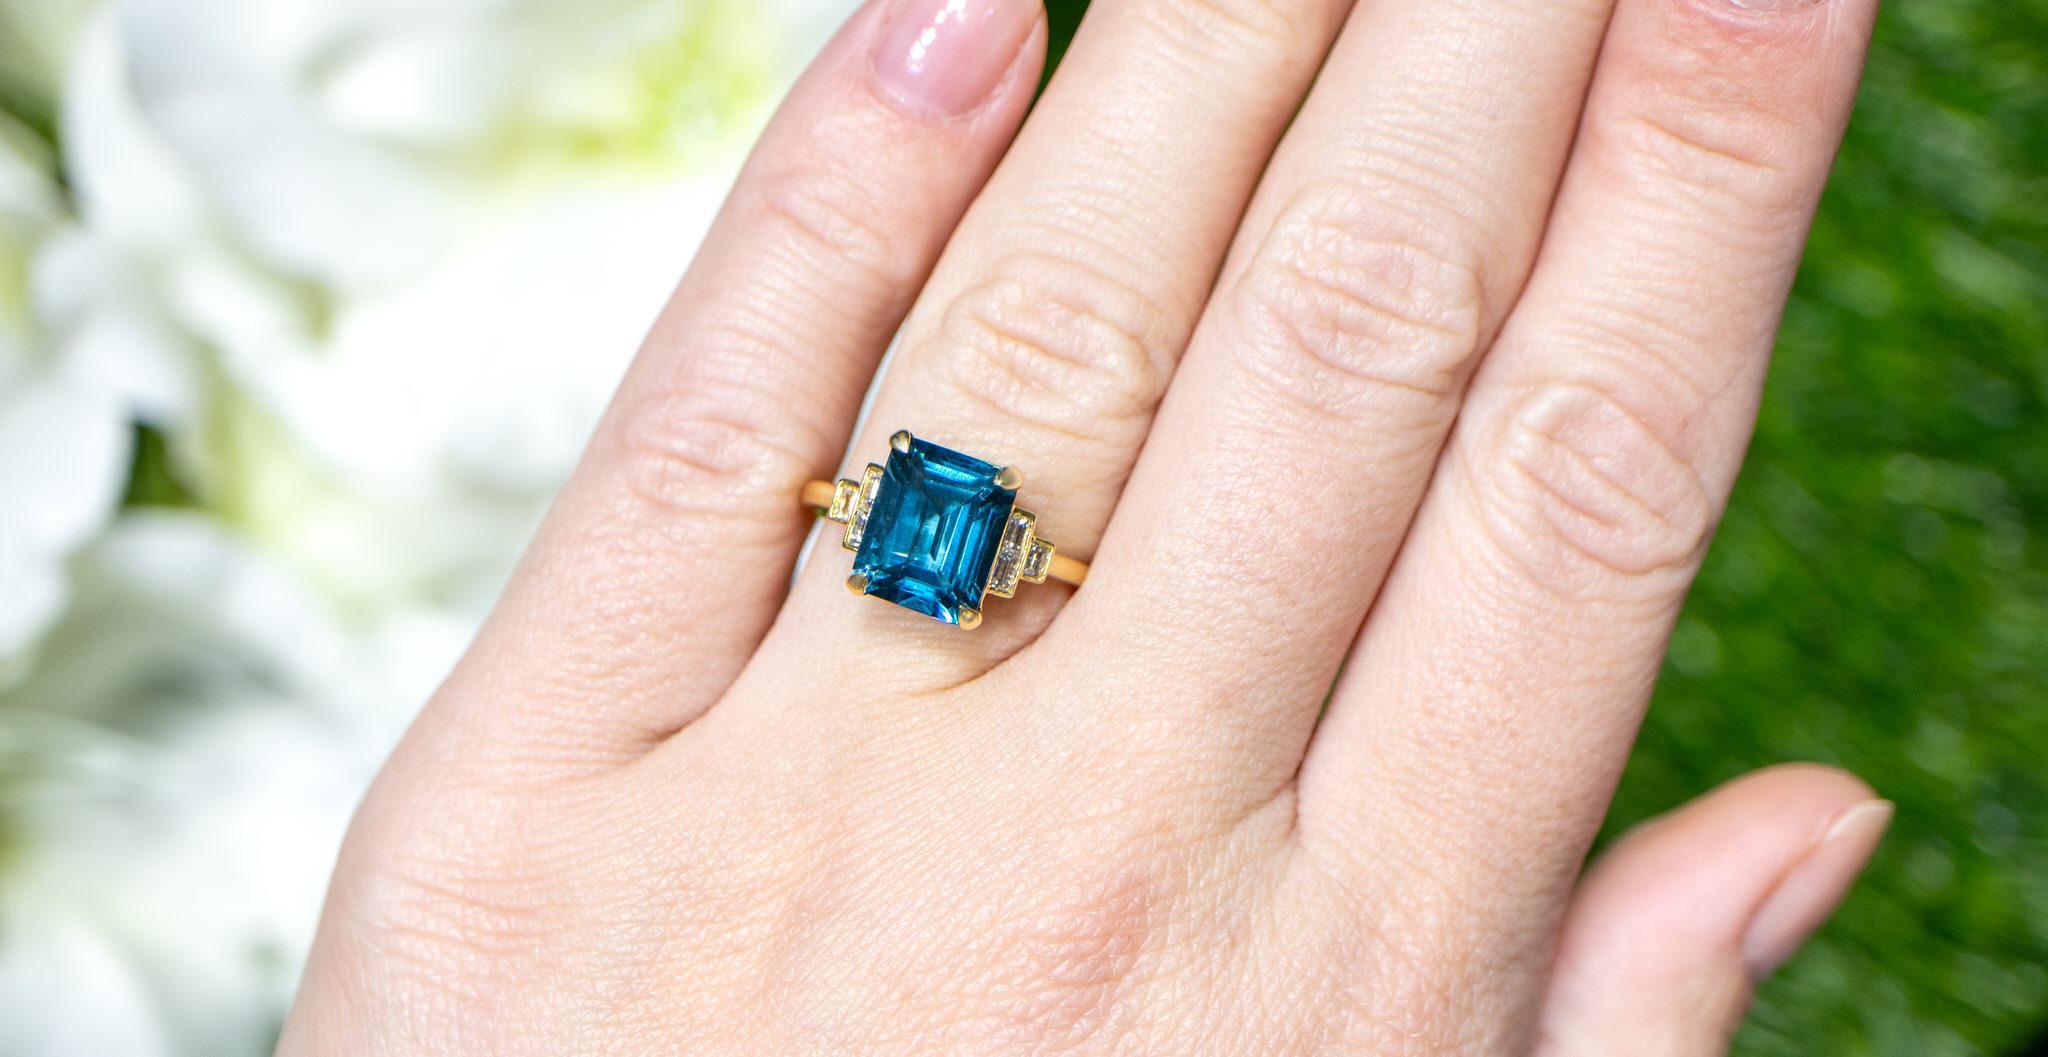 It comes with the Gemological Appraisal by GIA GG/AJP
All Gemstones are Natural
London Blue Topaz = 3.87 Carats
Diamonds = 0.20 Carats
Metal: 18K Yellow Gold
Ring Size: 6.5* US
*It can be resized complimentary